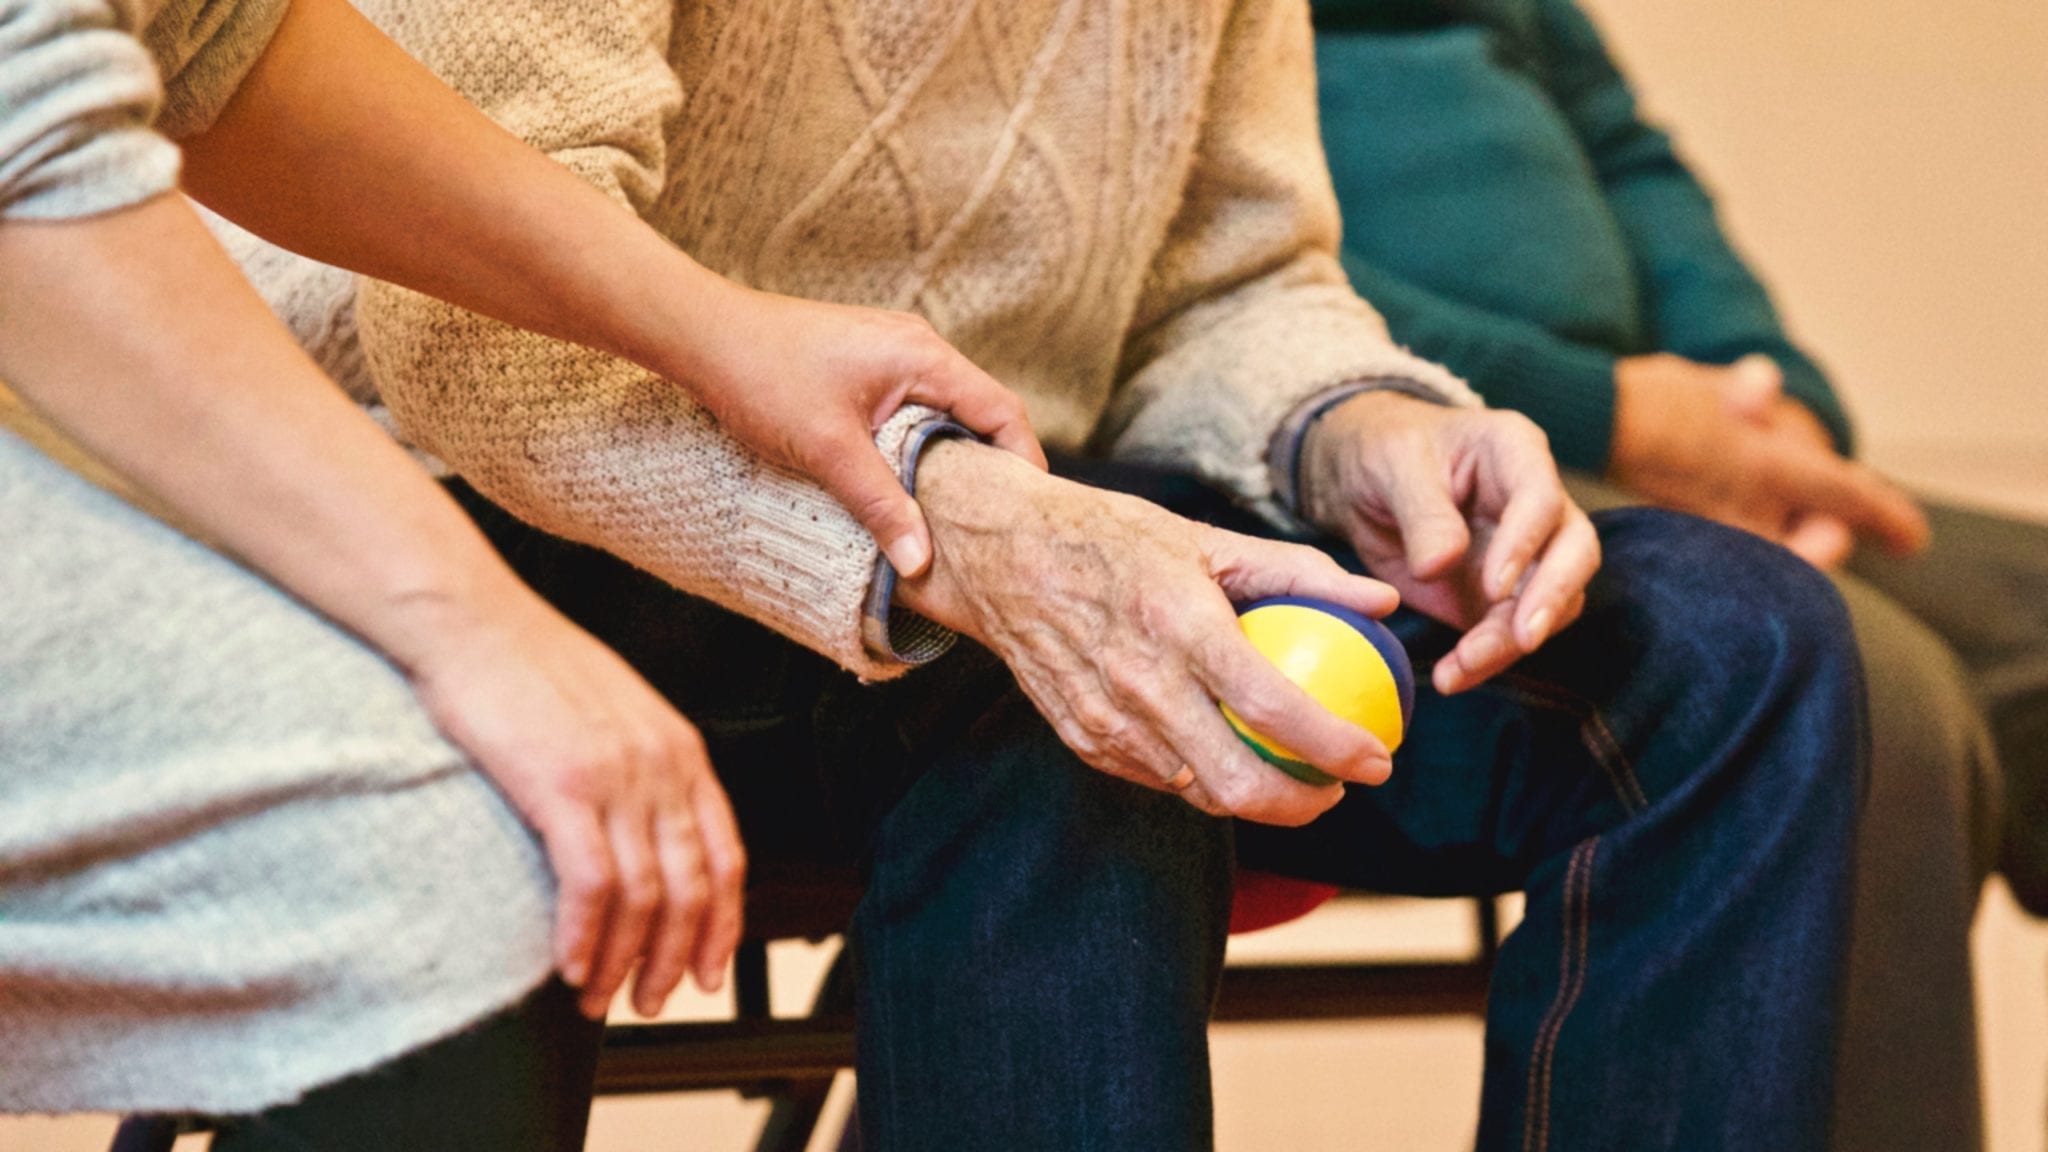 An elderly man sits holding a ball while another person gently grabs his wrist